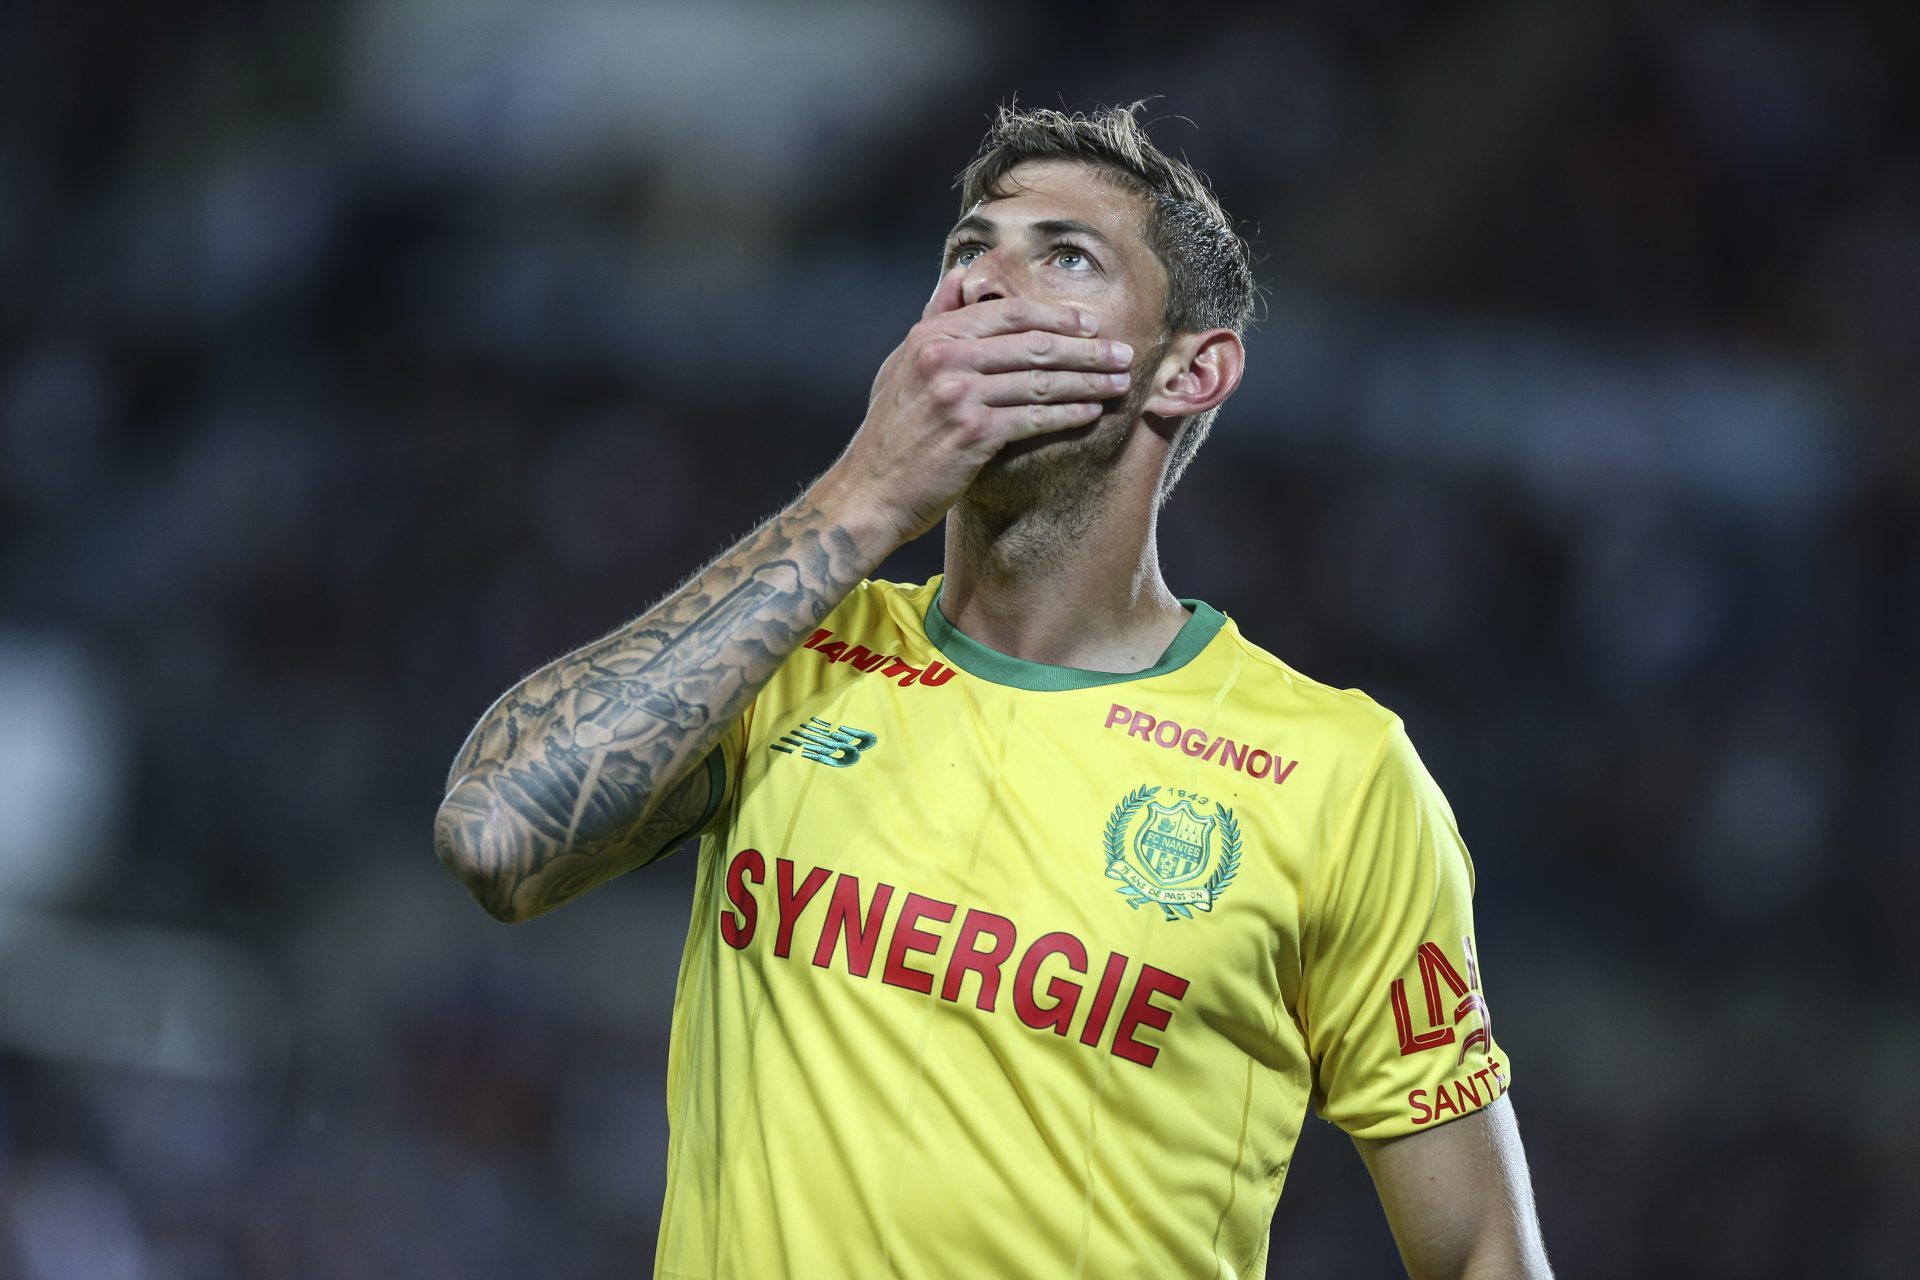 Why Cardiff City demands £100 million from Nantes after the death of Emiliano Sala